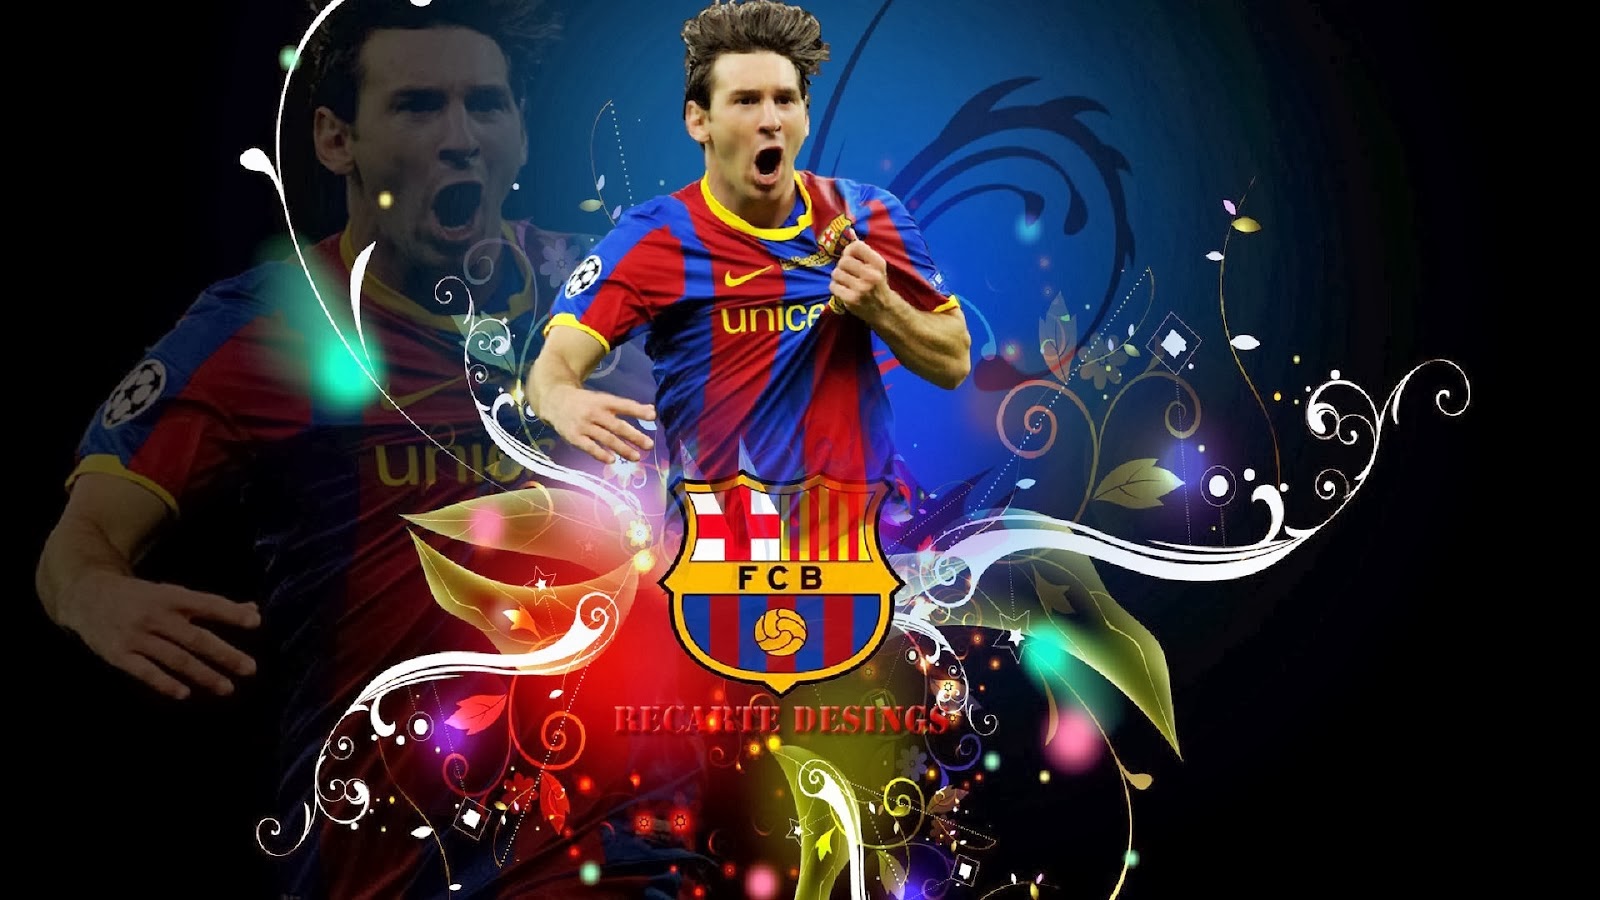 Lionel Messi 2014 HD Wallpaper Latest HD Wallpapers